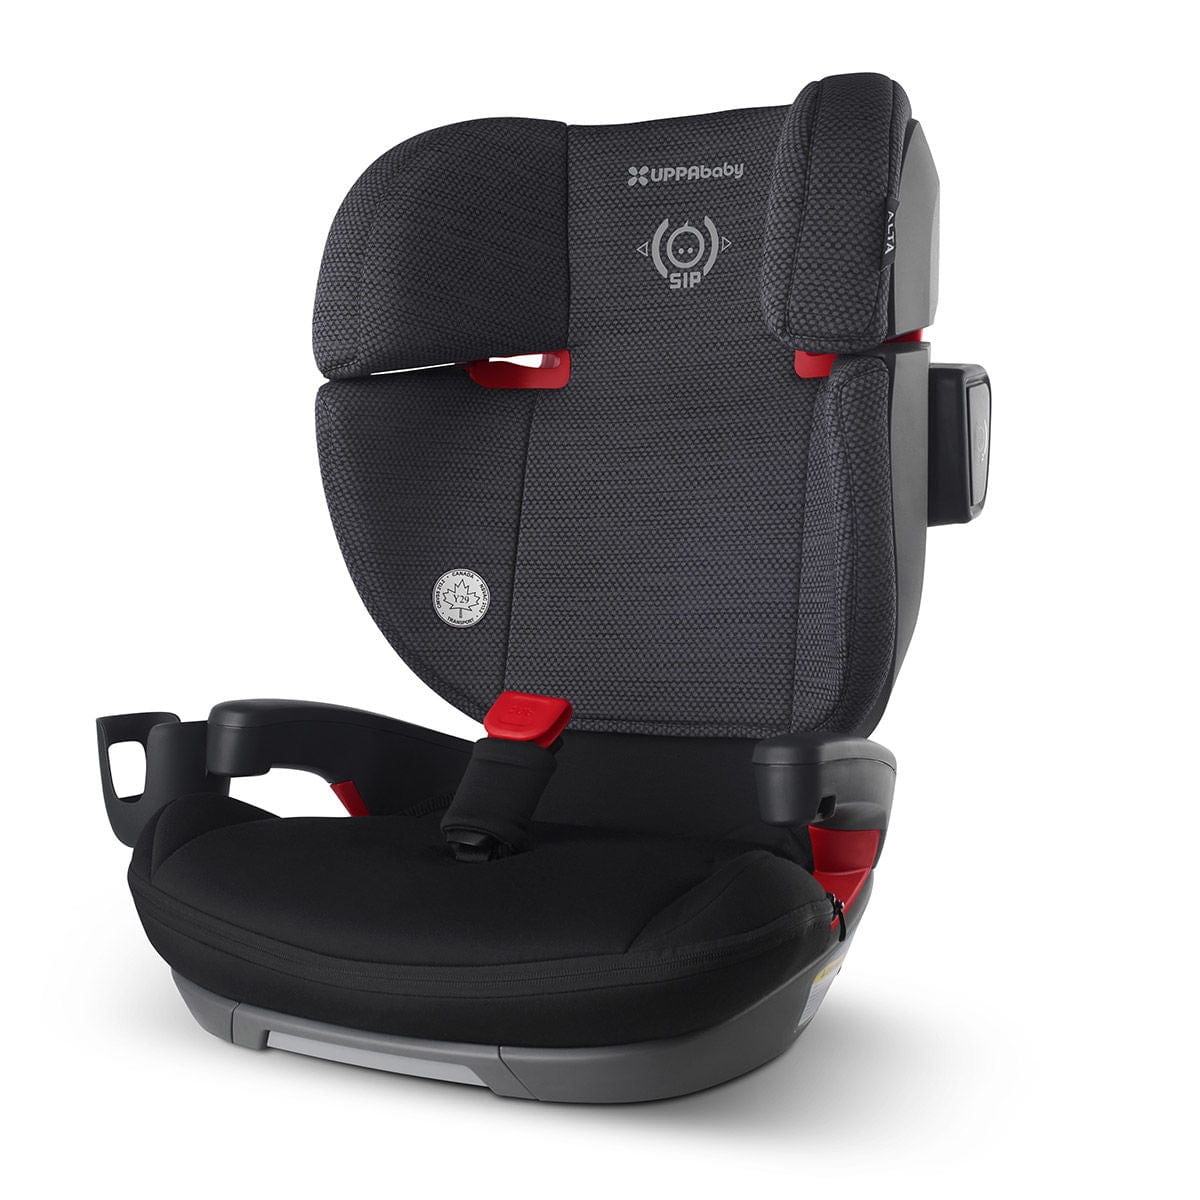 UPPAbaby booster seat Jake (Black) - UPPAbaby ALTA Booster UPPAbaby ALTA Full-Back Booster Seat